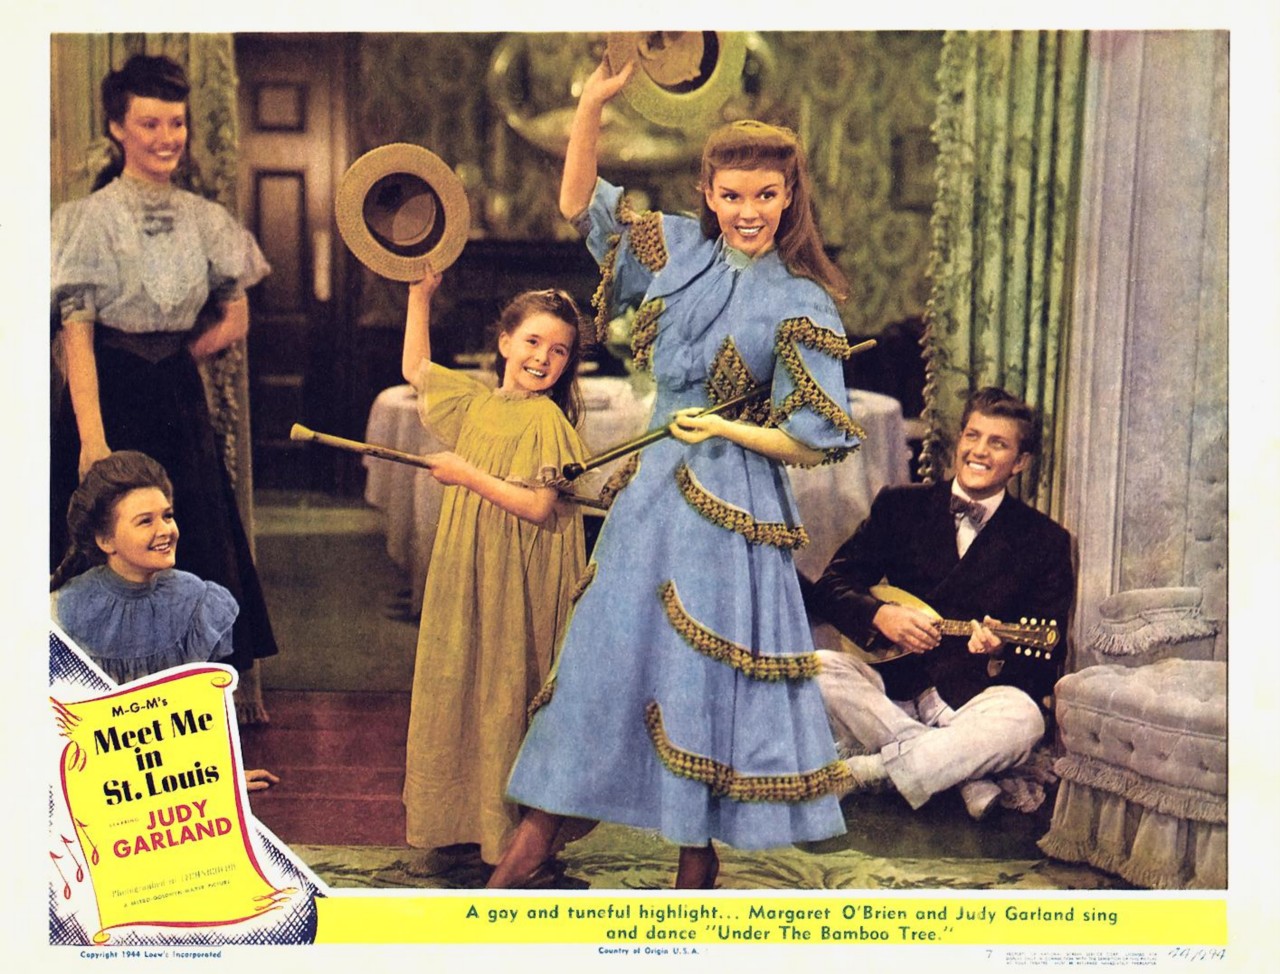 JUDY GARLAND COSTUMES, STAGE AND TV WARDROBE - Services